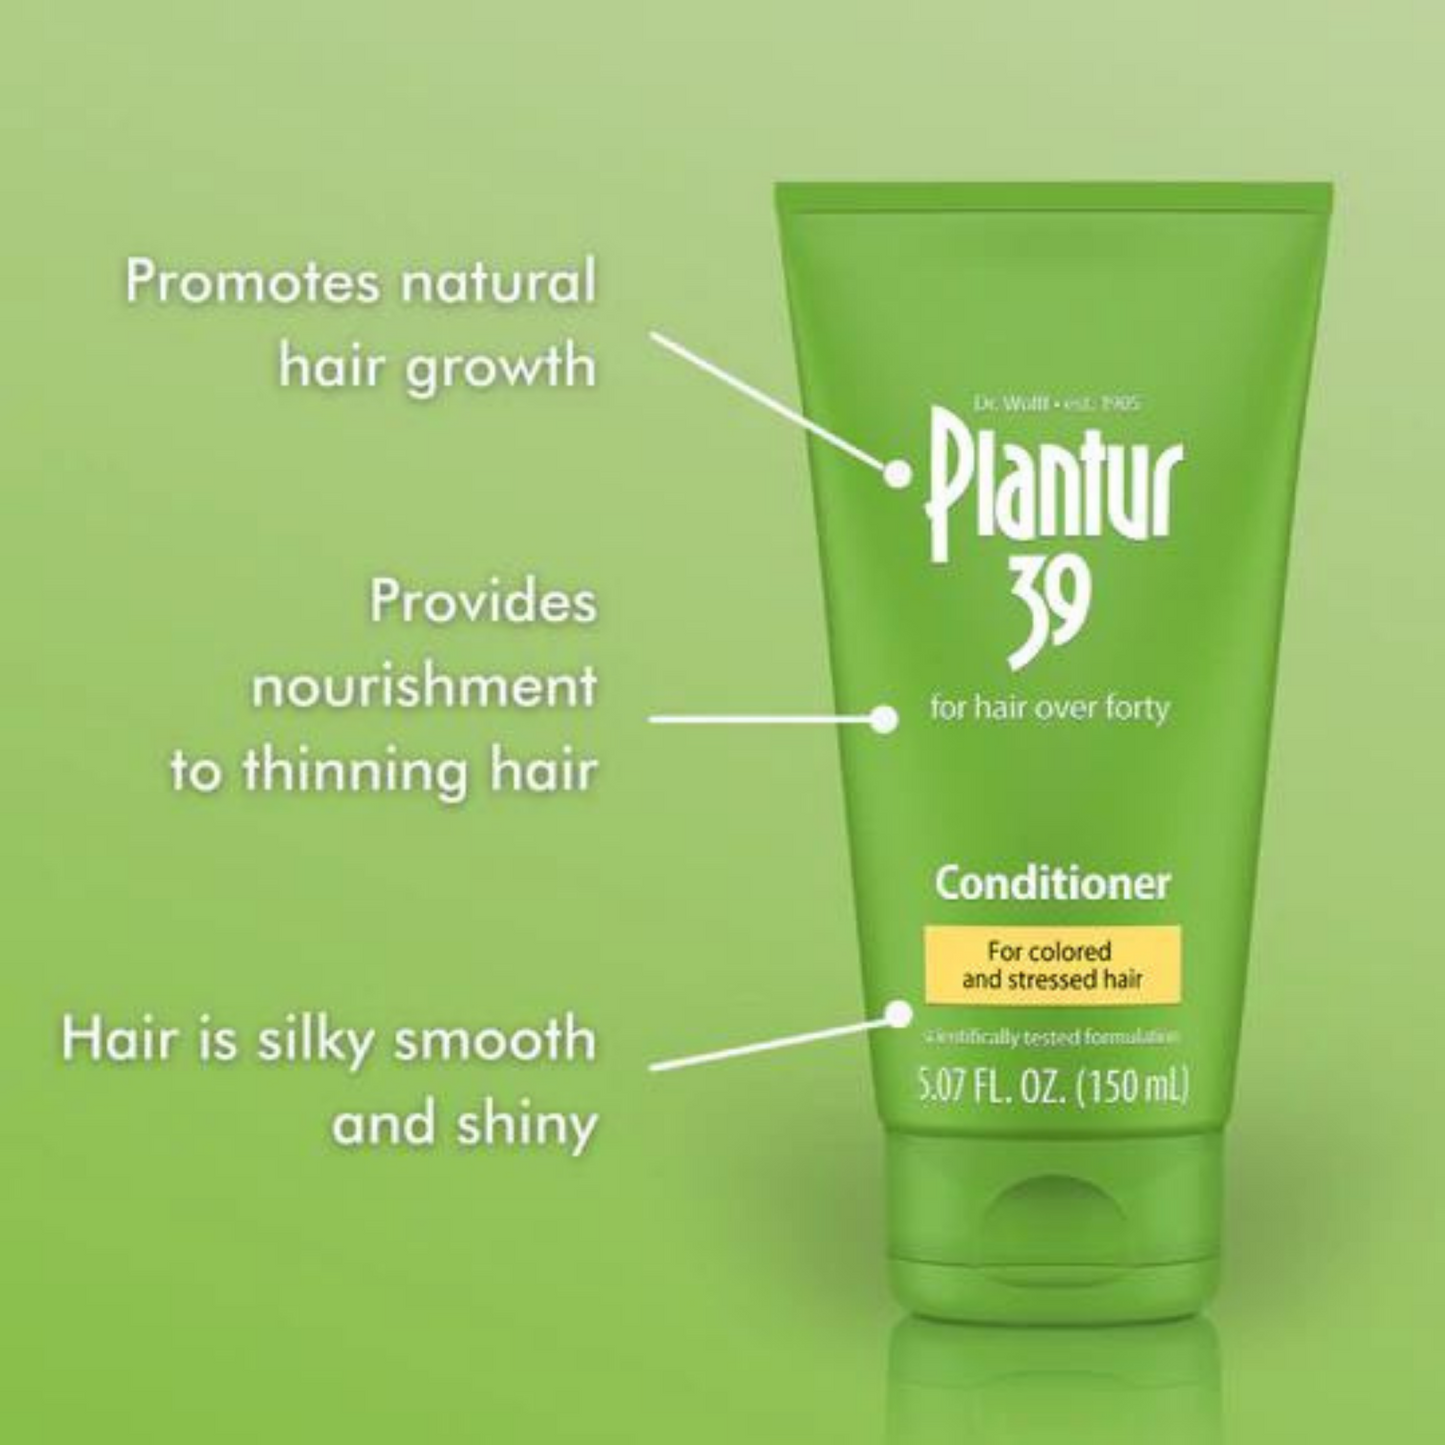 Plantur 39 Colored and Stressed Hair Conditioner (150 ml) #10084904